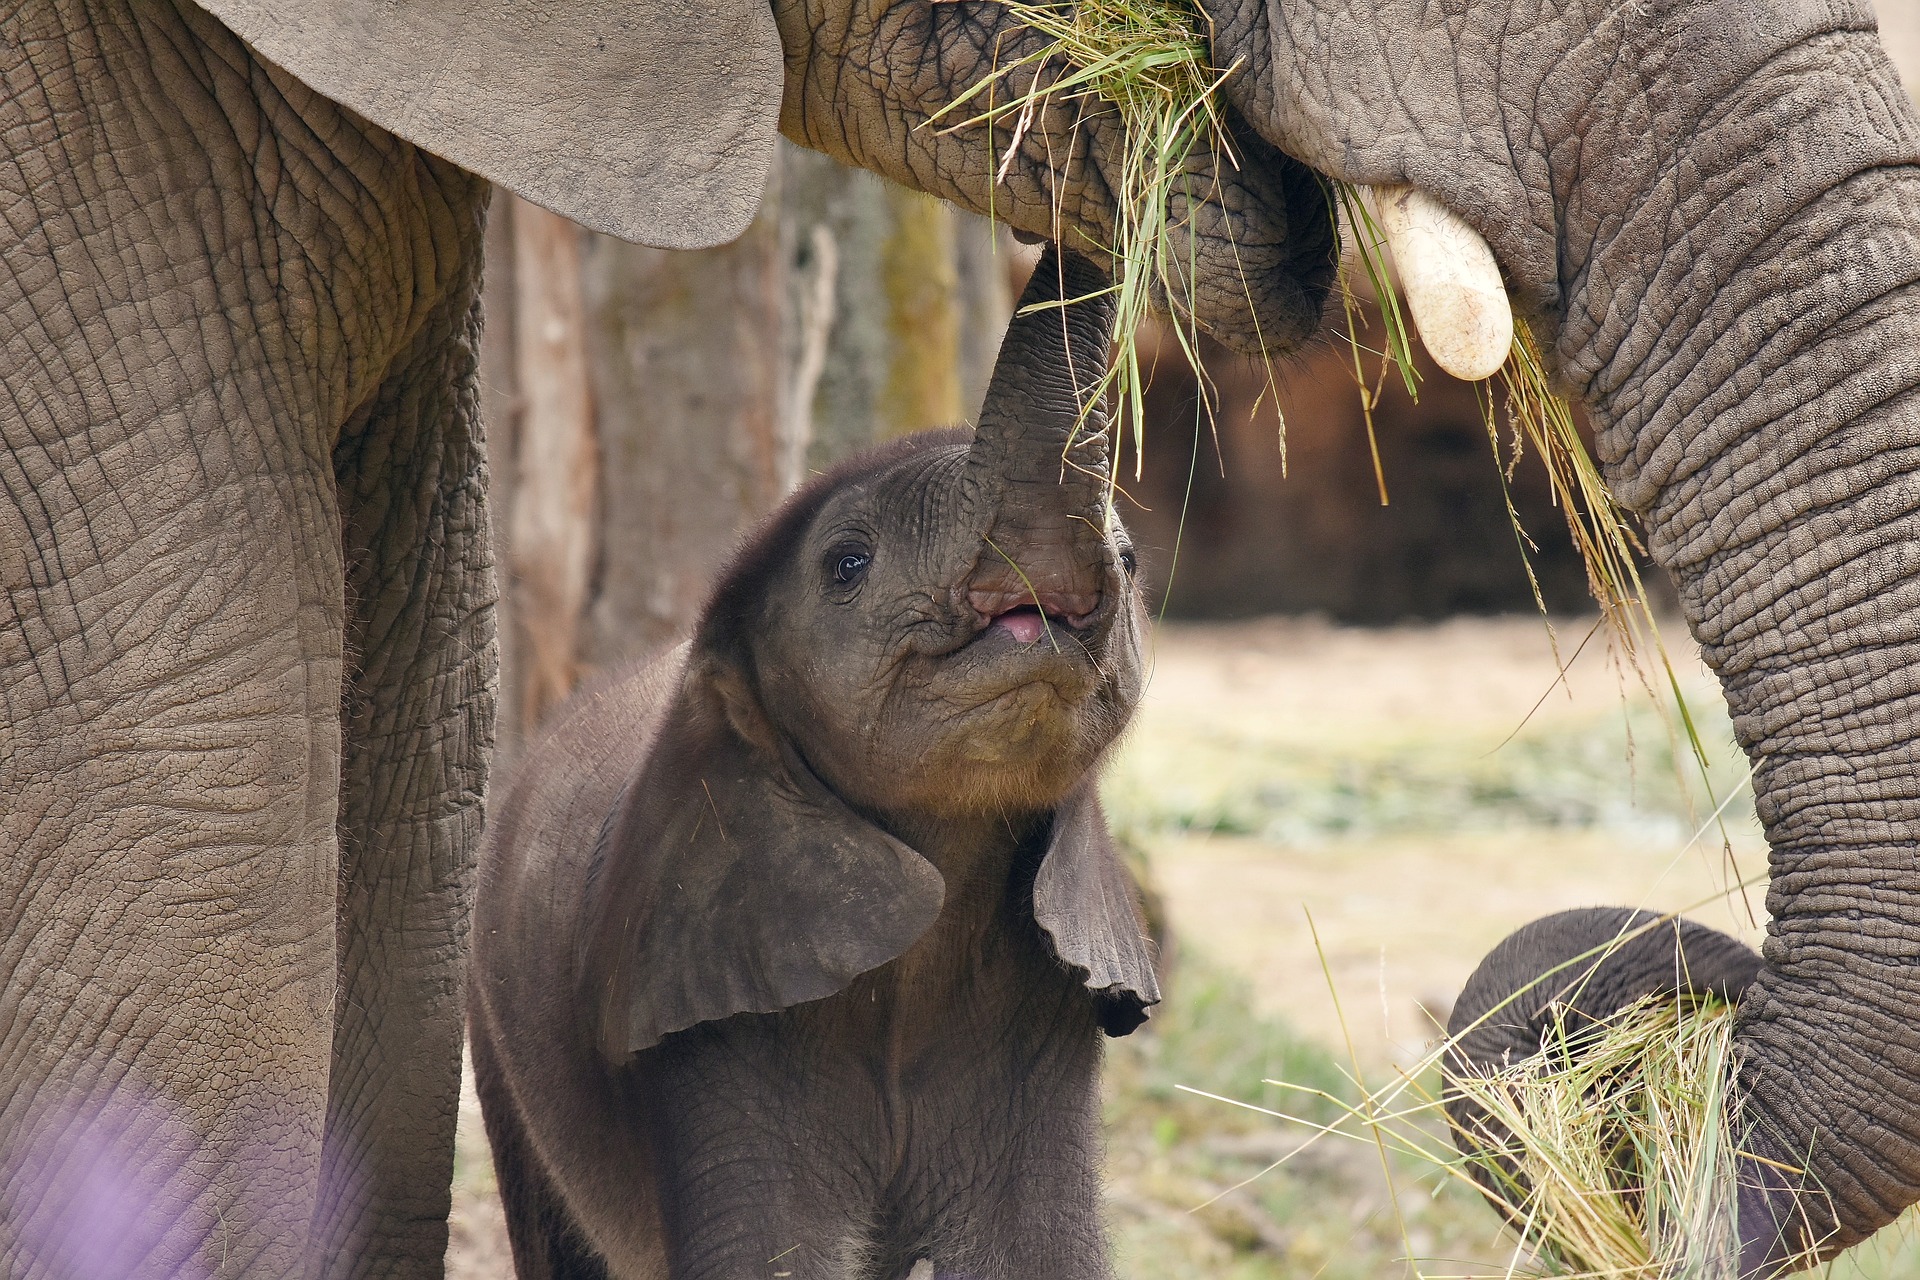 A mother elephant in Ayutthaya, Thailand, gave birth to rare twin elephants last Friday (7th). Photo/PTS News Network